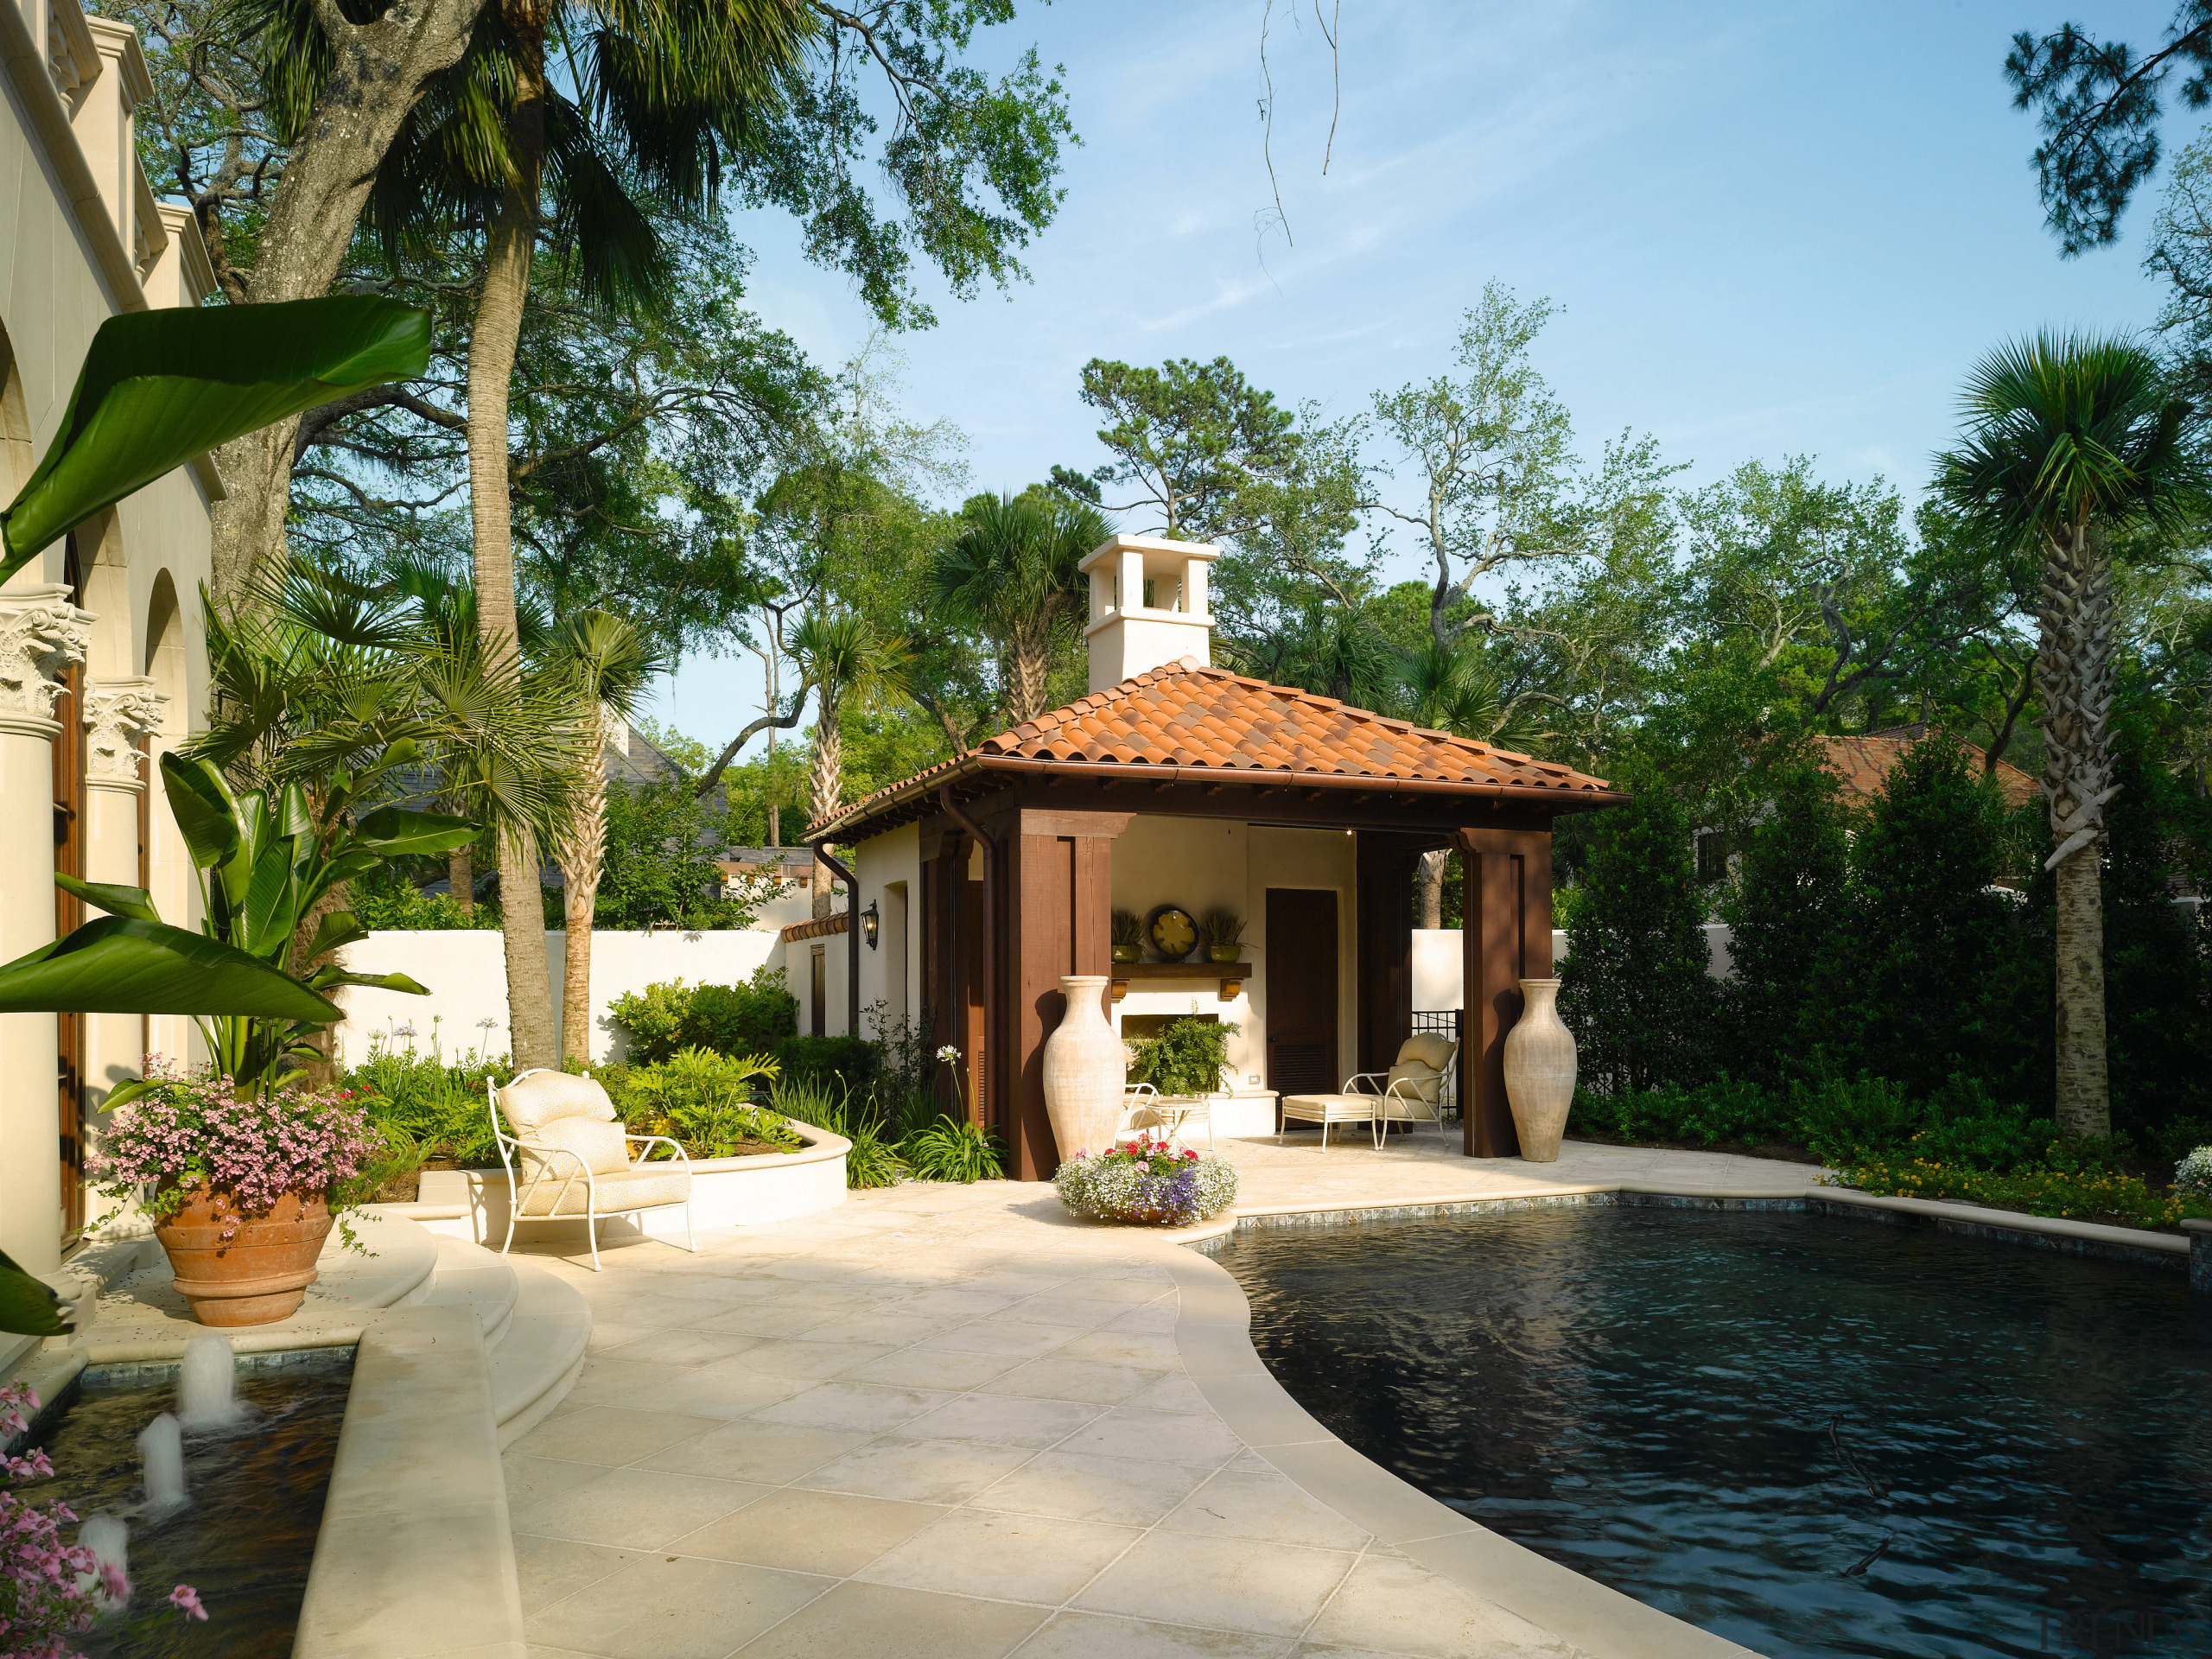 View of the cabana, water feature and pool arecales, cottage, estate, hacienda, home, house, mansion, outdoor structure, palm tree, property, real estate, resort, tree, villa, brown